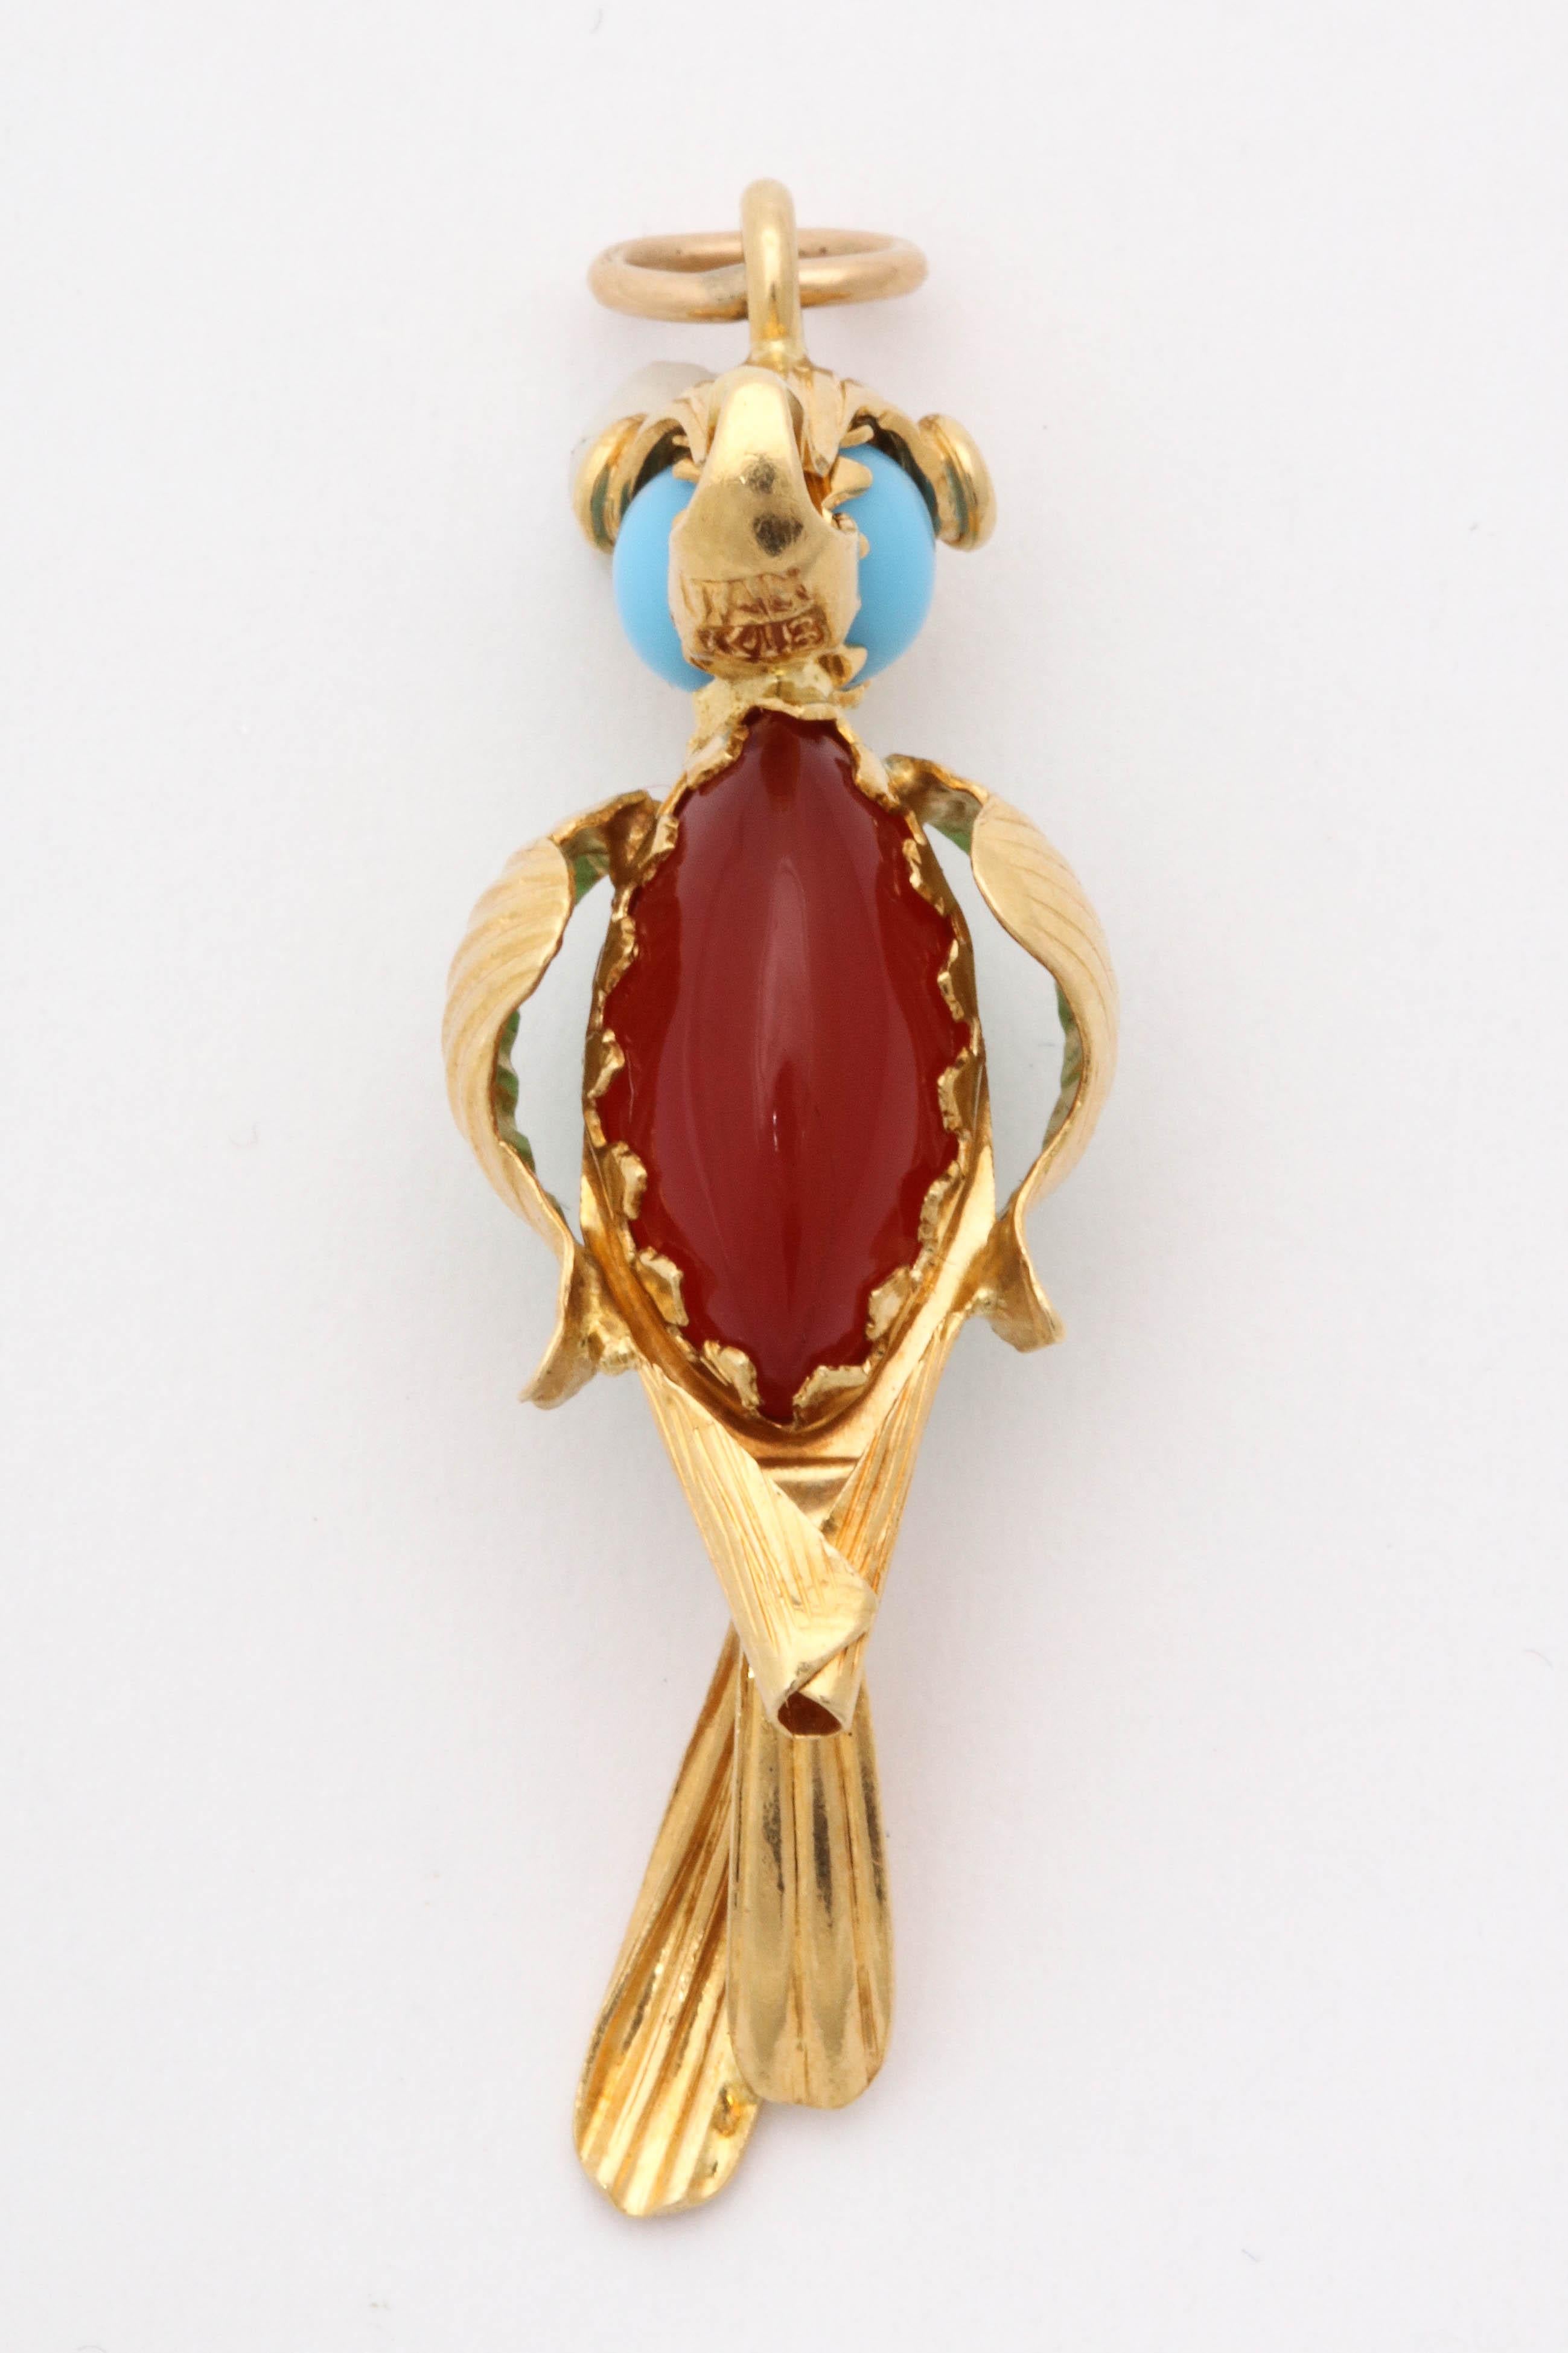 One Ladies 18kt Yellow Gold Figural And Whimisical Parrot Charm Brooch Embellished With One Marquis Cut Cabochon Jade Piece And On The Otherside Of His Body A Marquis Cut Carnelian Stone. Also Embellished With Two Turquoise Stones And Red Enamel For